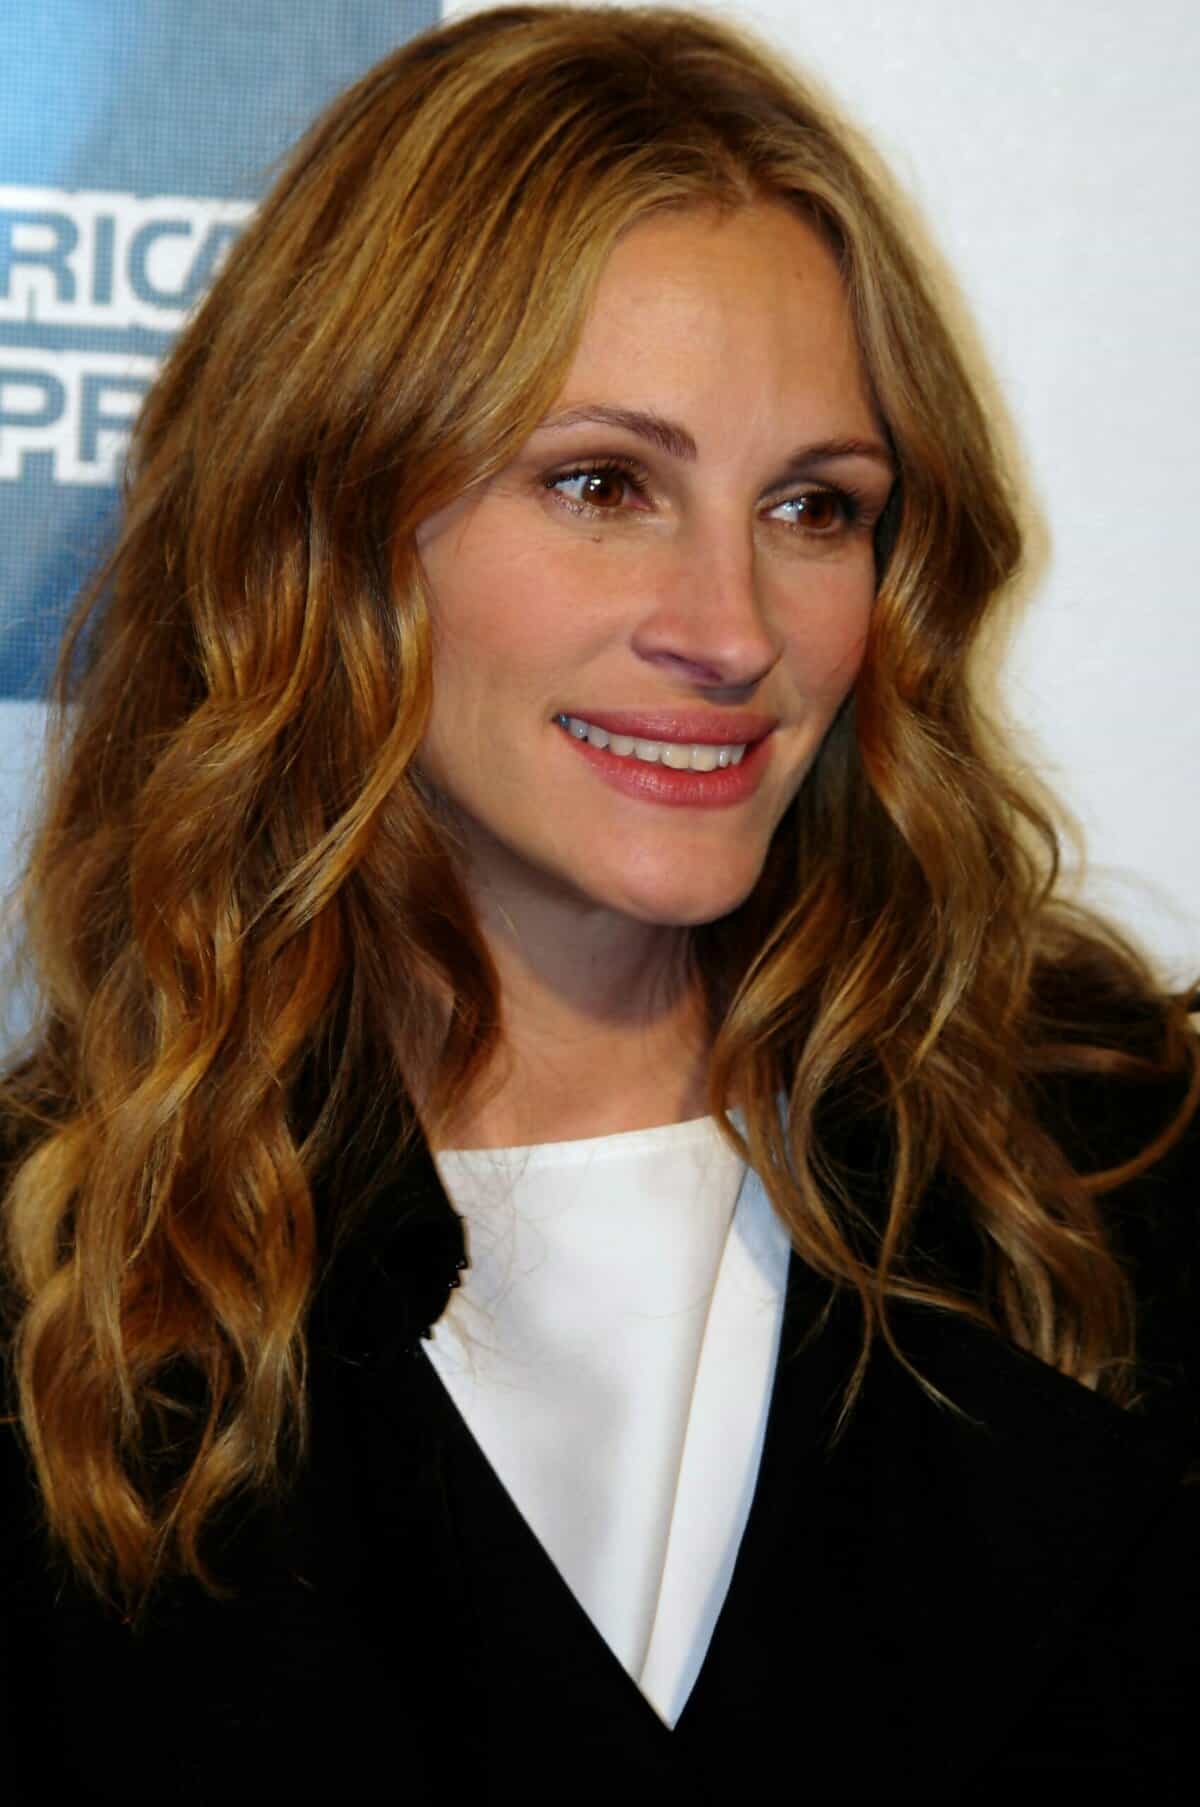 a candid photo of Julia Roberts smiling and wearing a black blazer and white shirt with her hair down